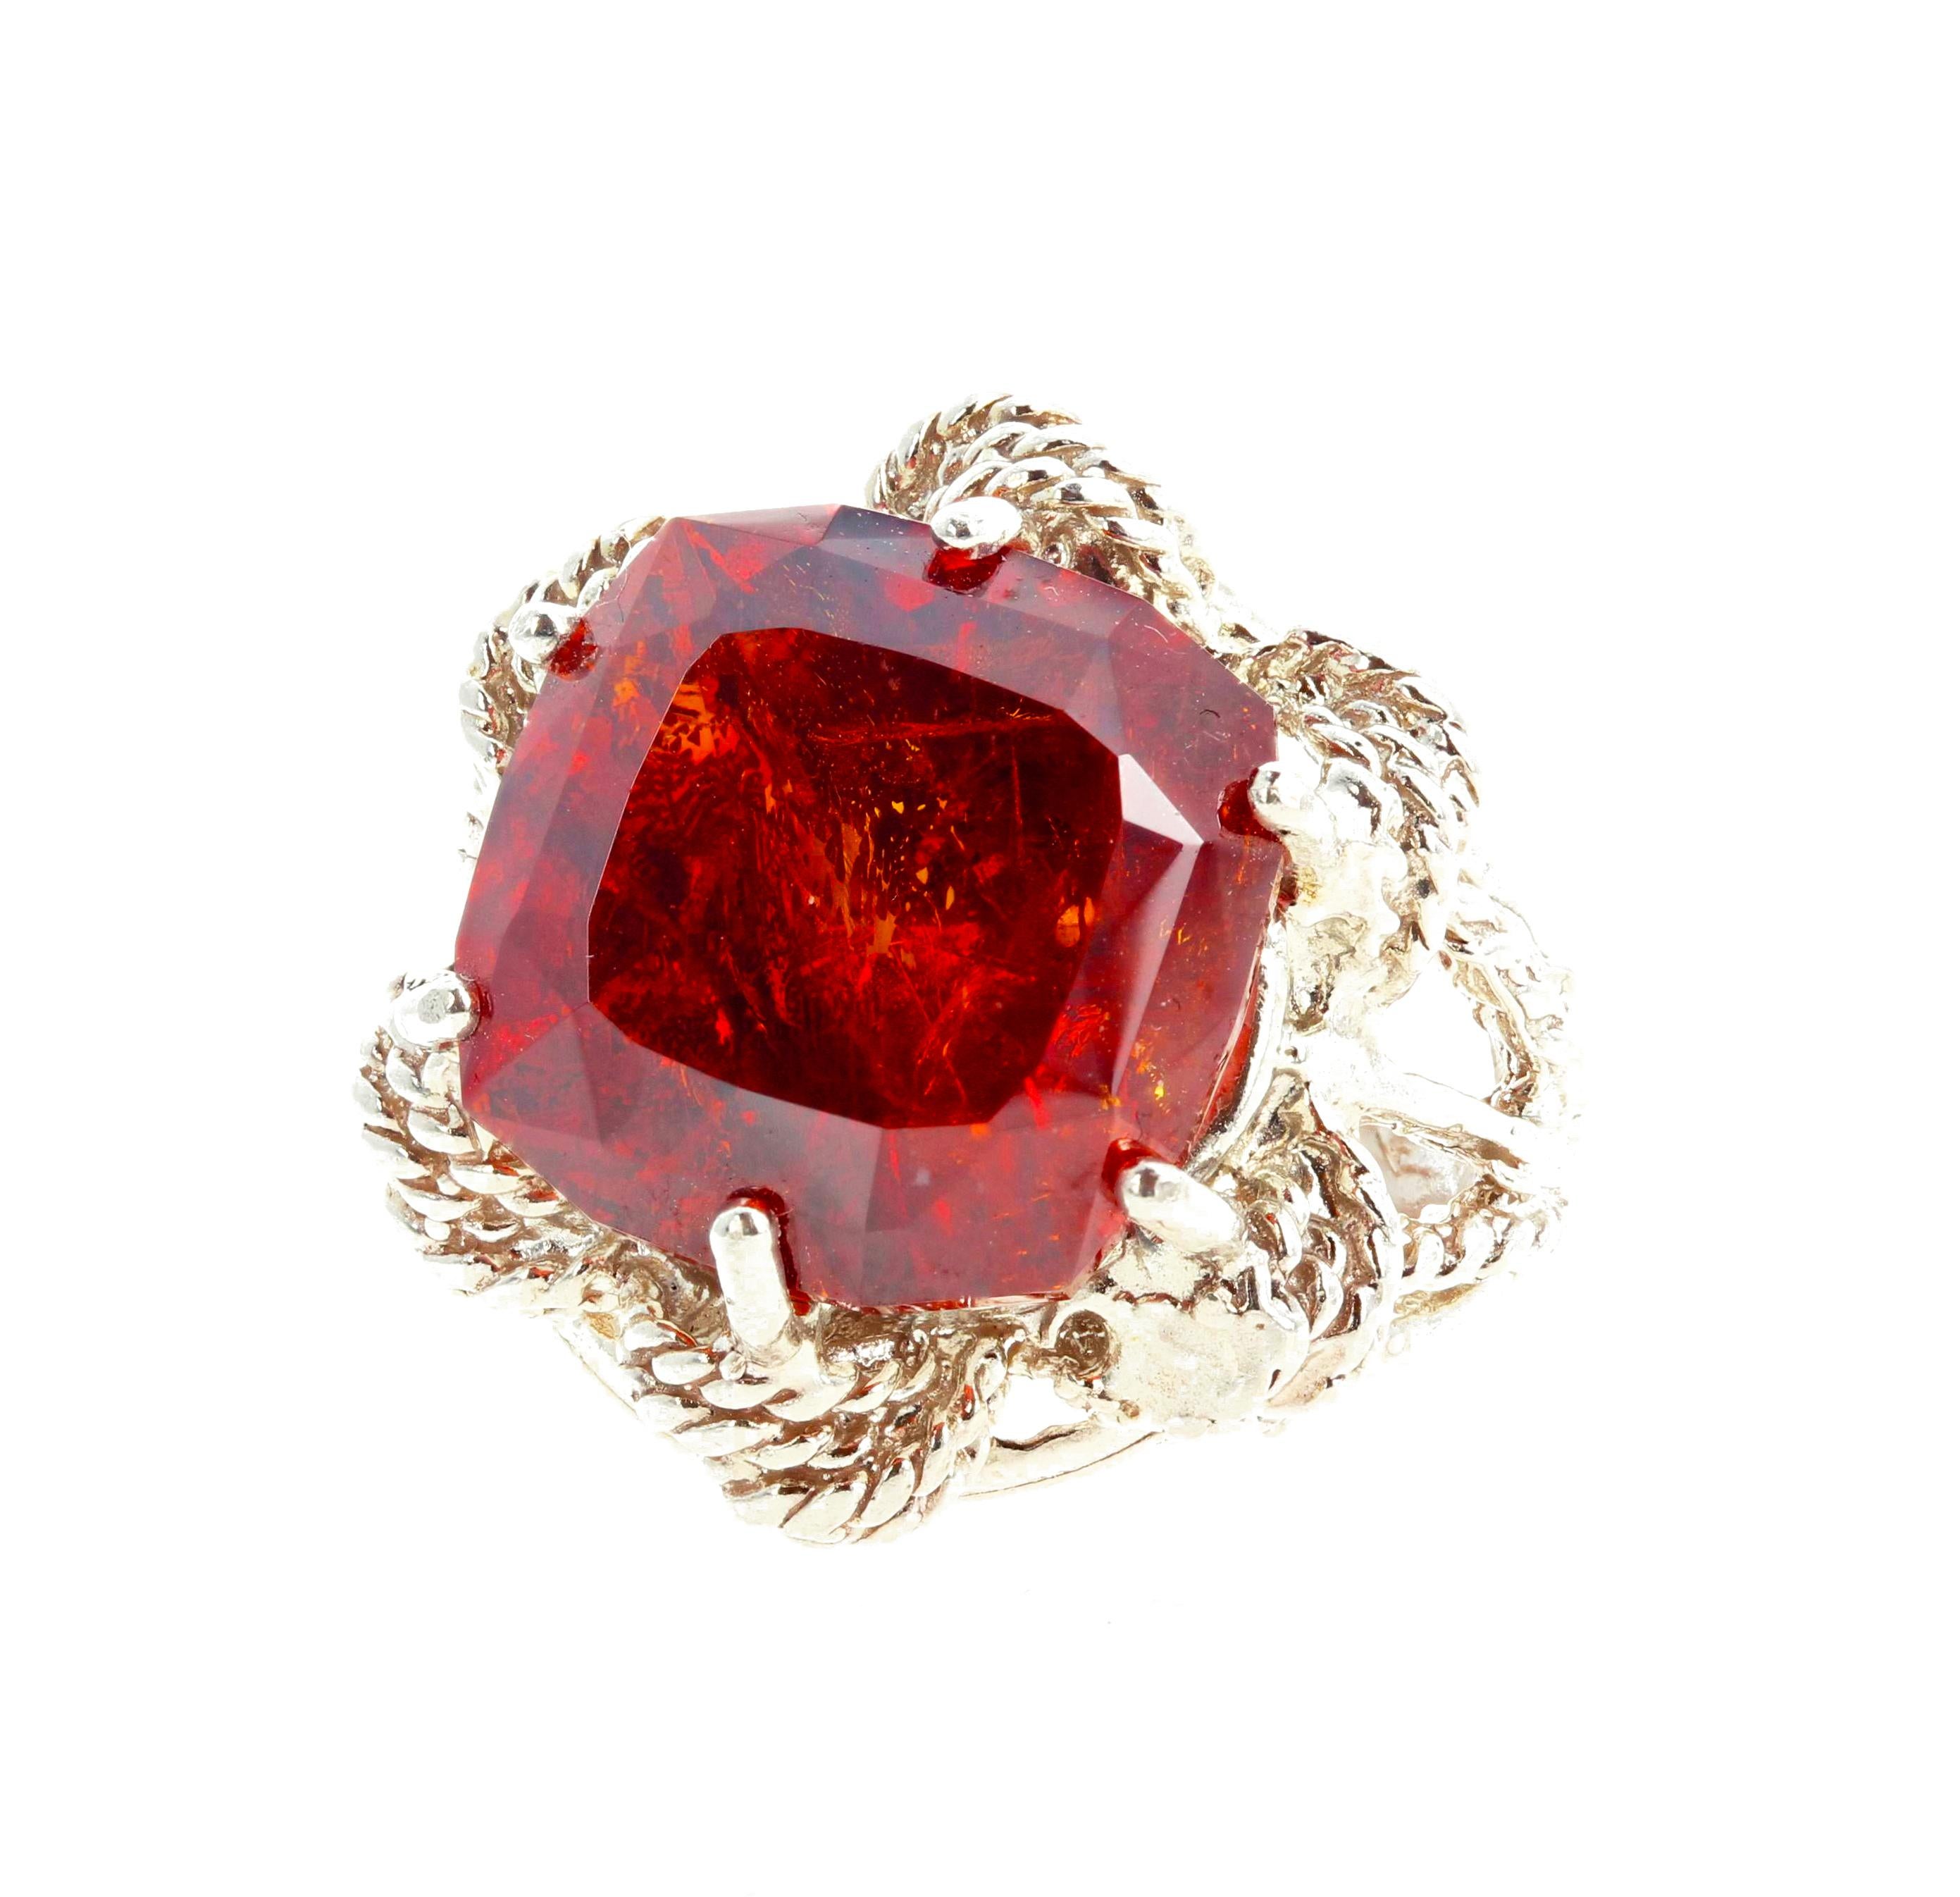 Women's or Men's AJD Intensely Extremely Glittering VERY RARE 16.4 Carat Sphalerite Ring For Sale